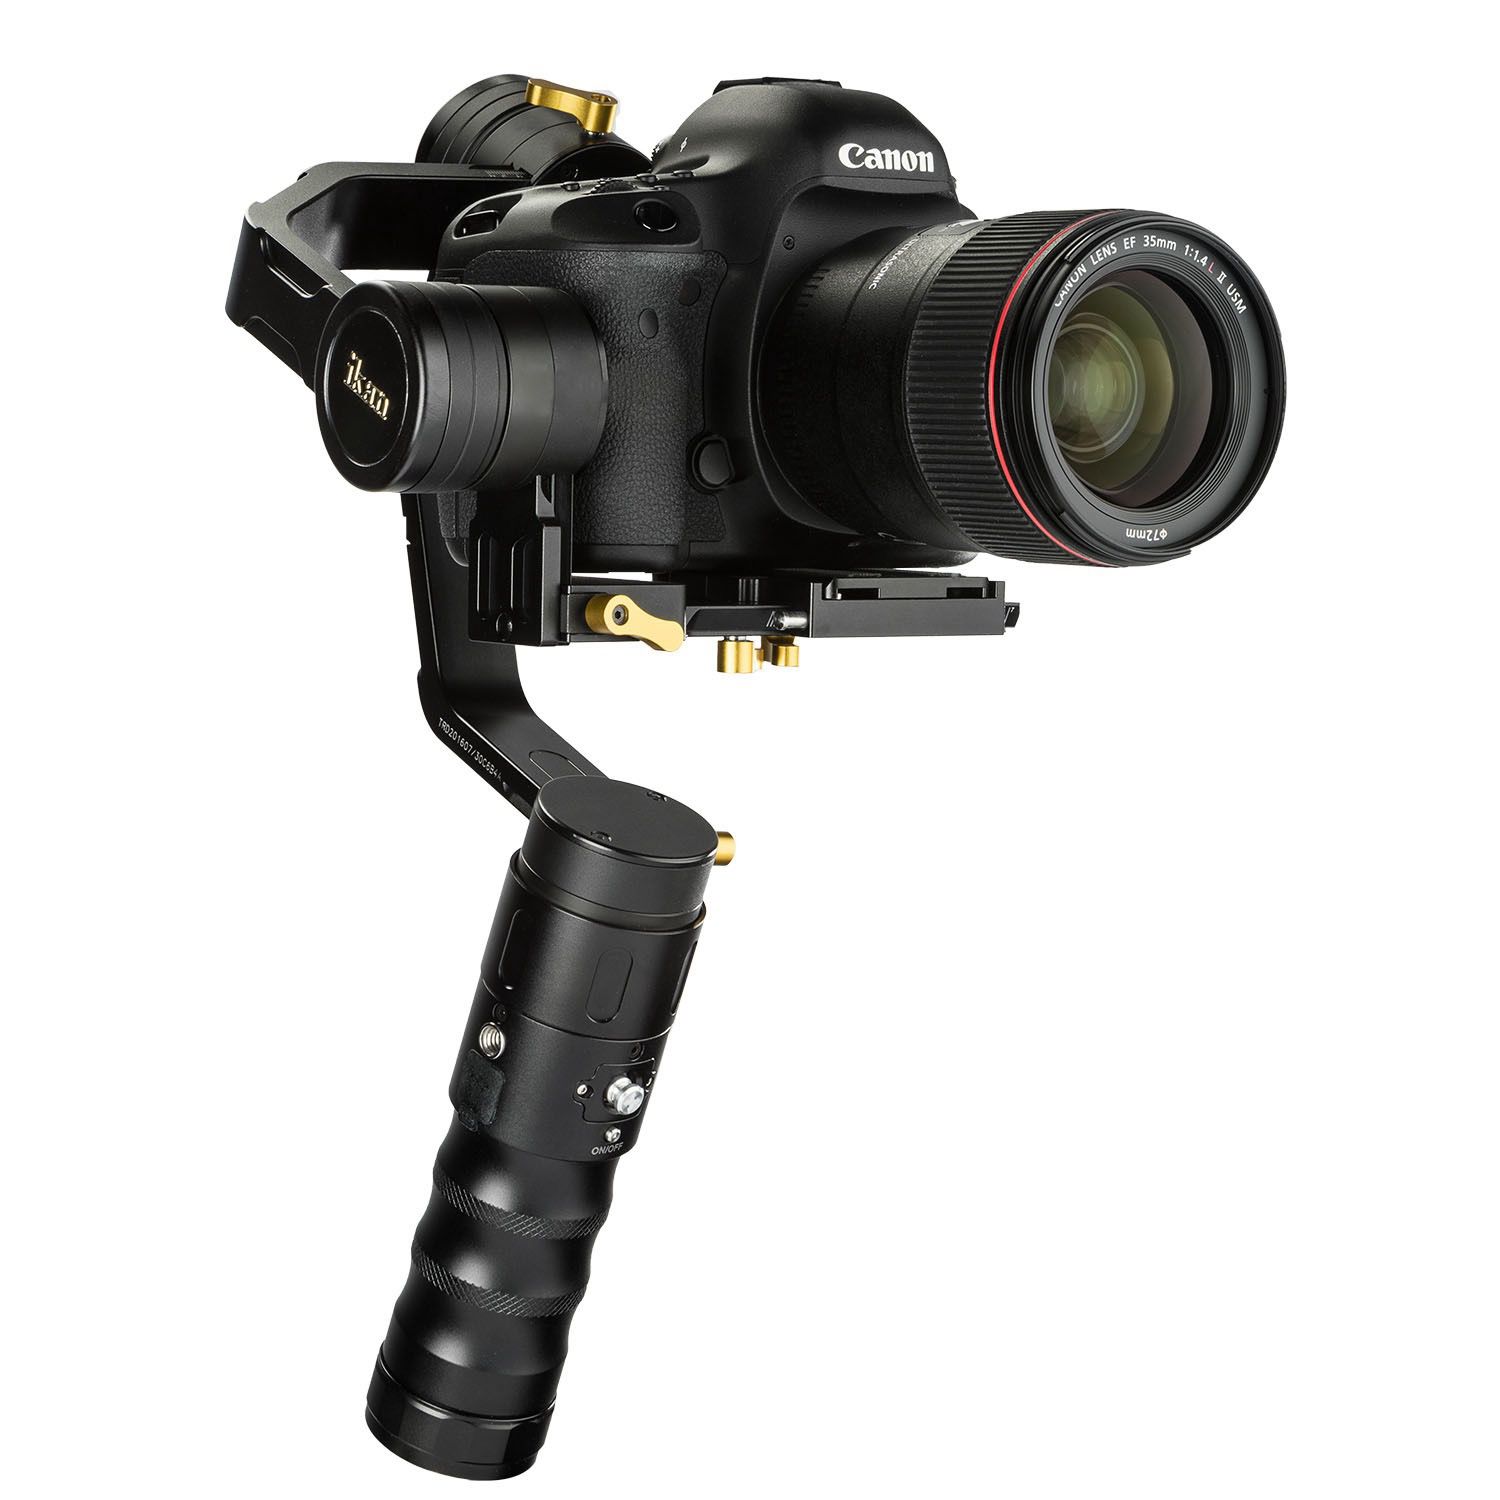 Ikan Beholder 3-Axis Gimbal EC1 Stabilizer for DSLR and Mirrorless Cameras